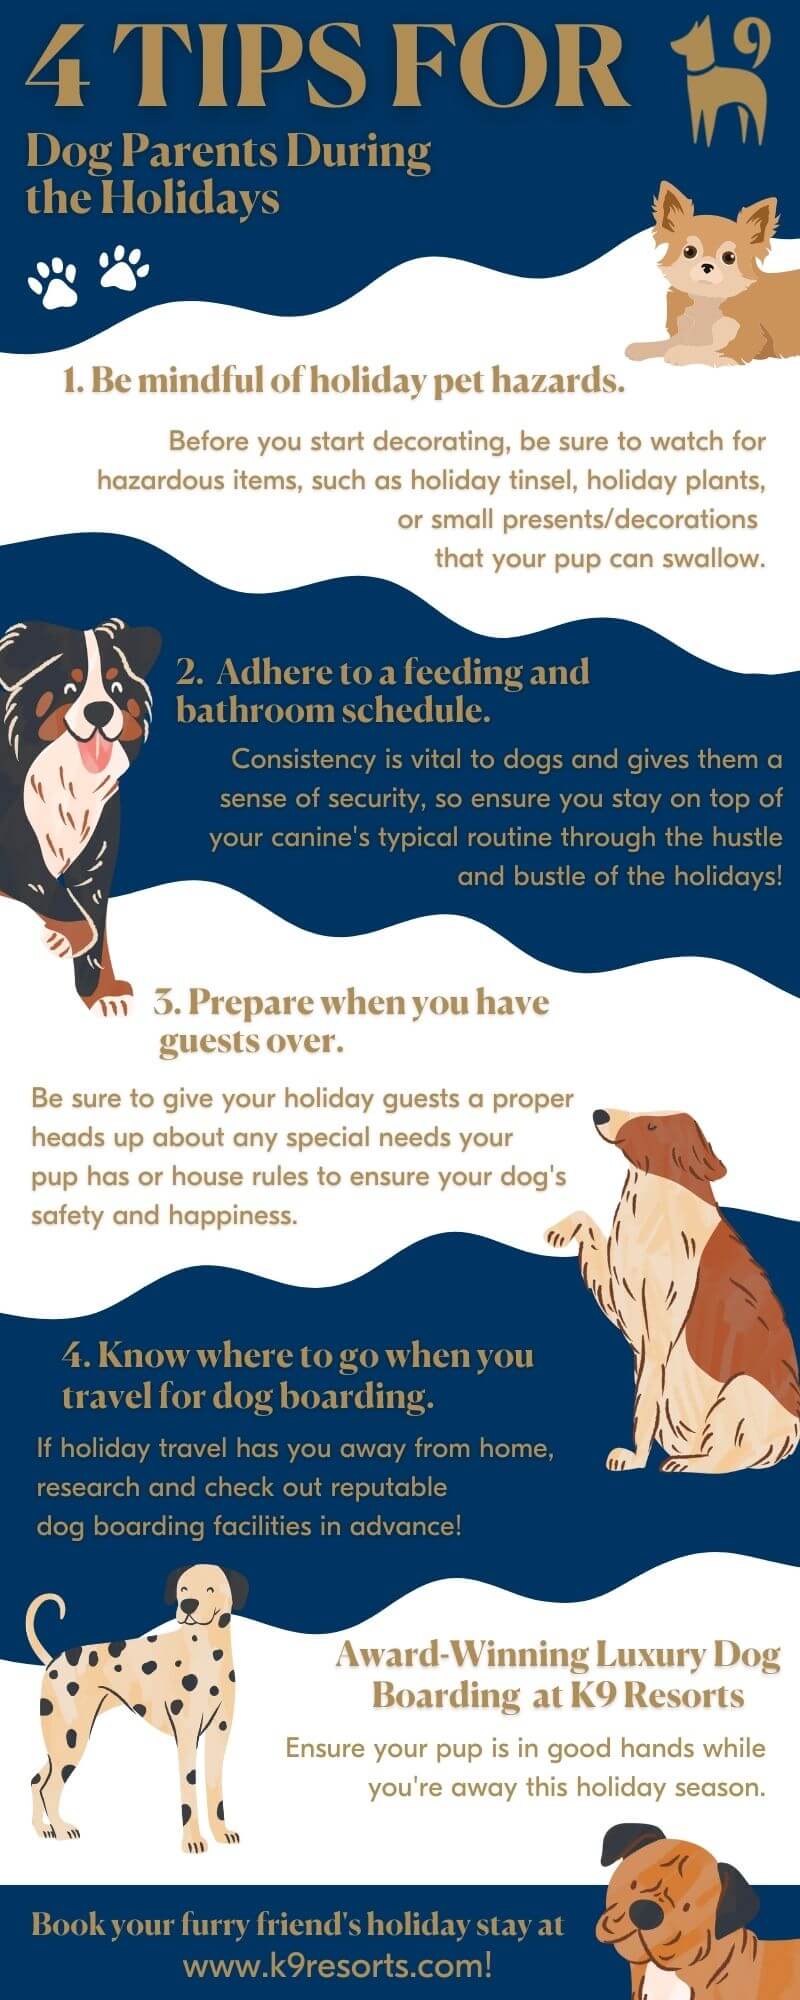 holiday tips for dog parents